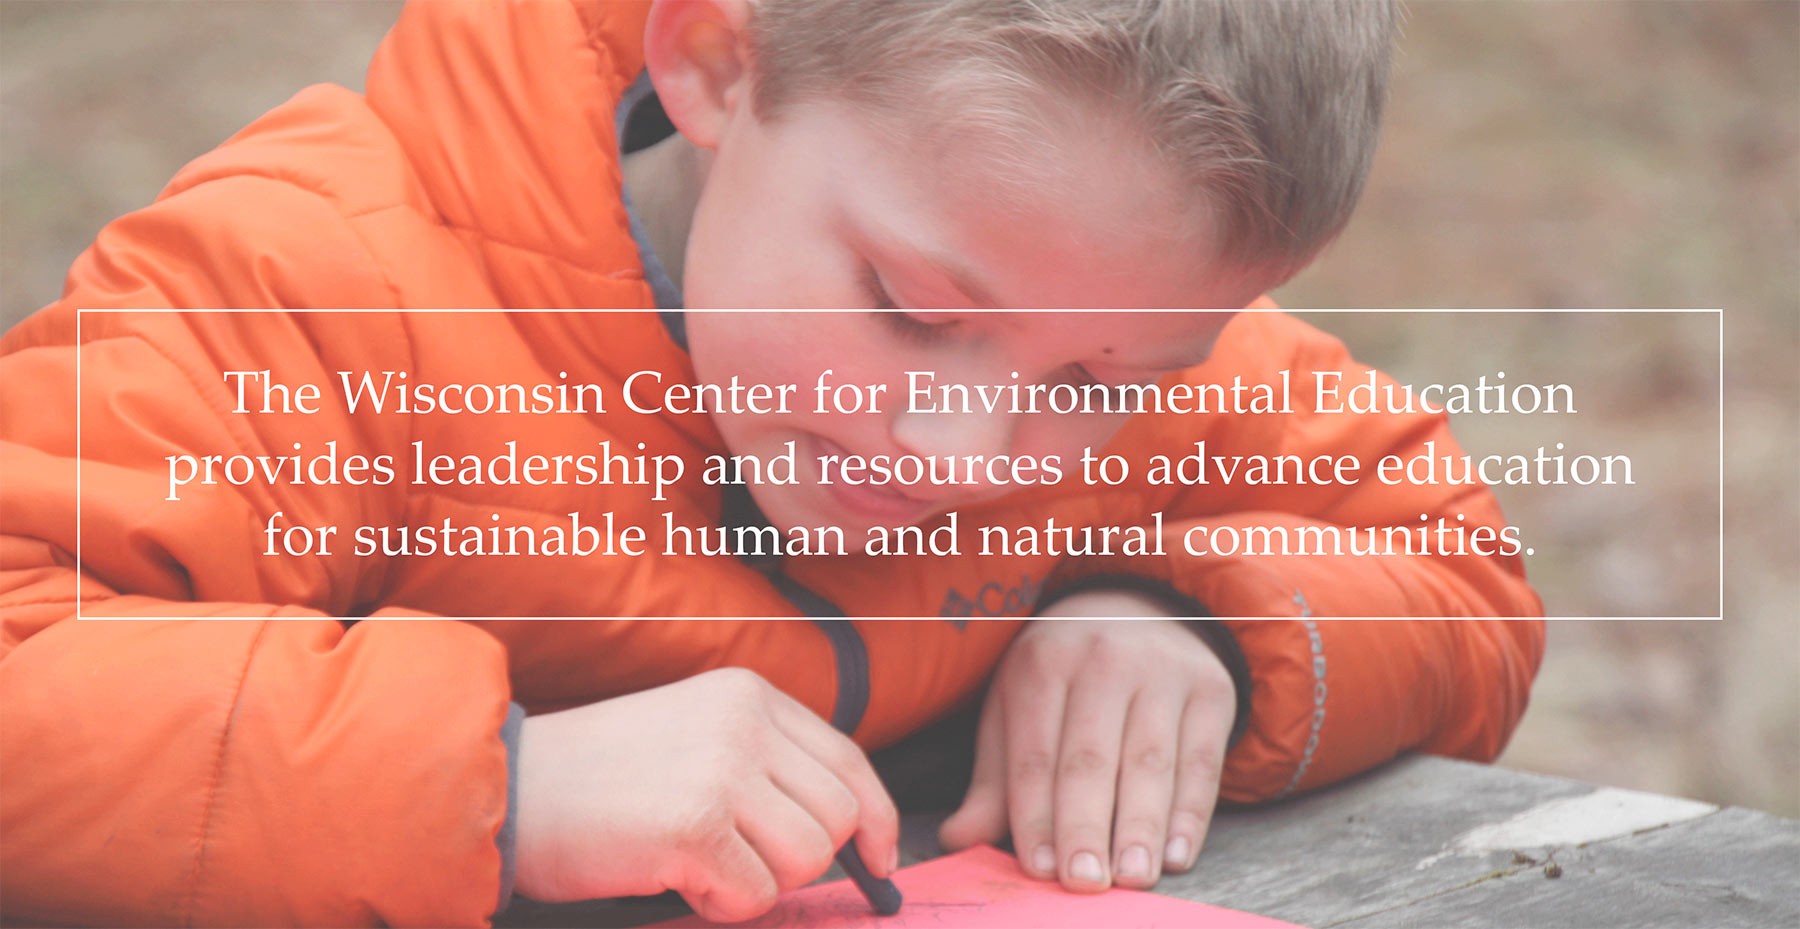 The Wisconsin Center for Environmental Education provides leadership and resources to advance education for sustainable human and natural communities.